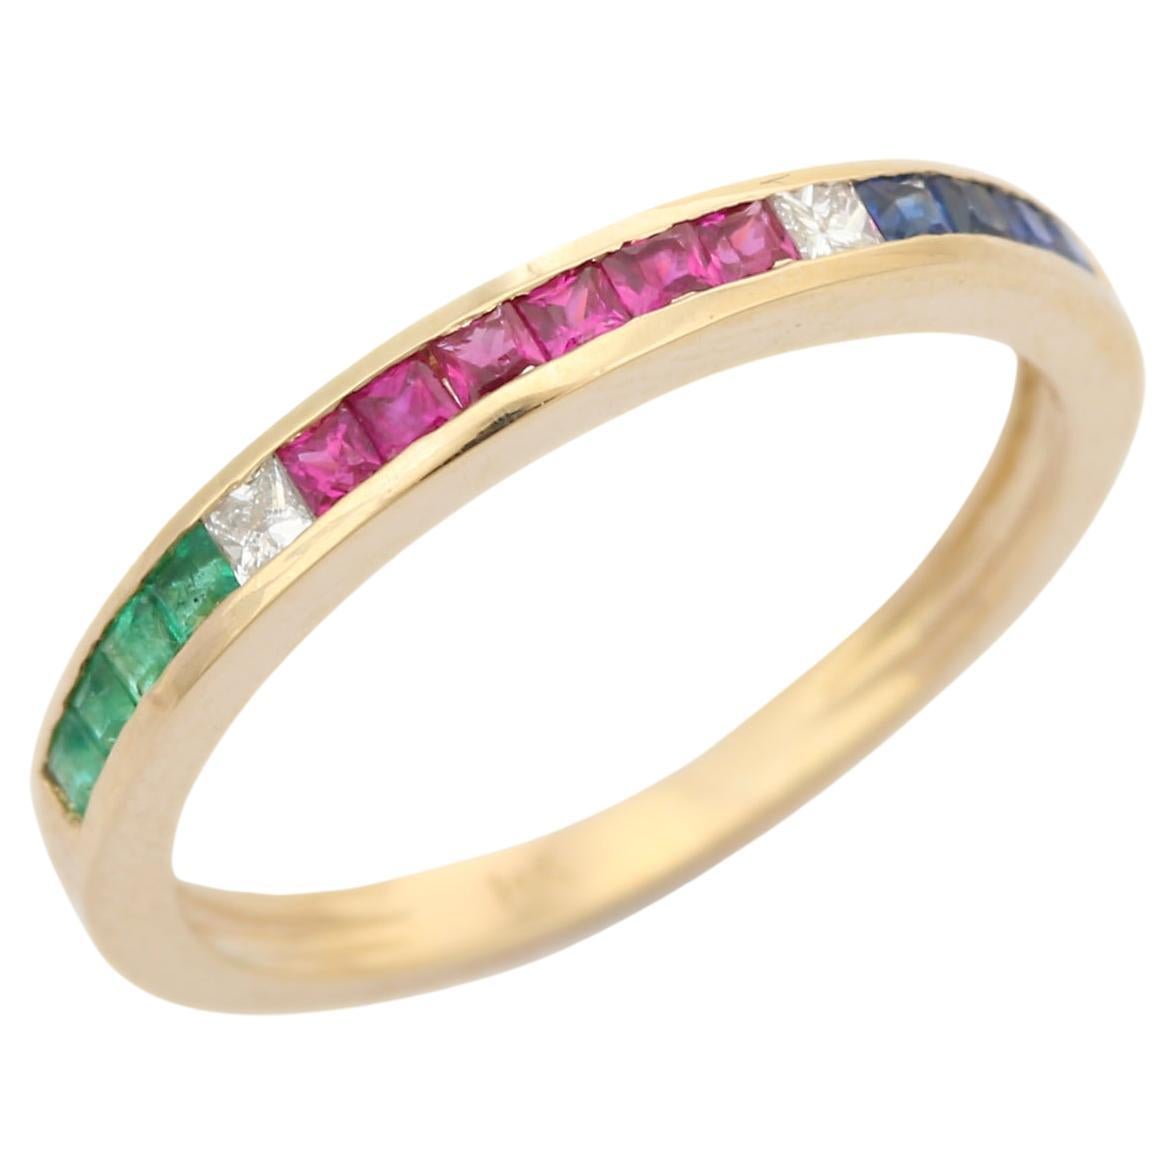 For Sale:  Stackable Emerald, Ruby and Sapphire Band Ring in 14k Solid Yellow Gold